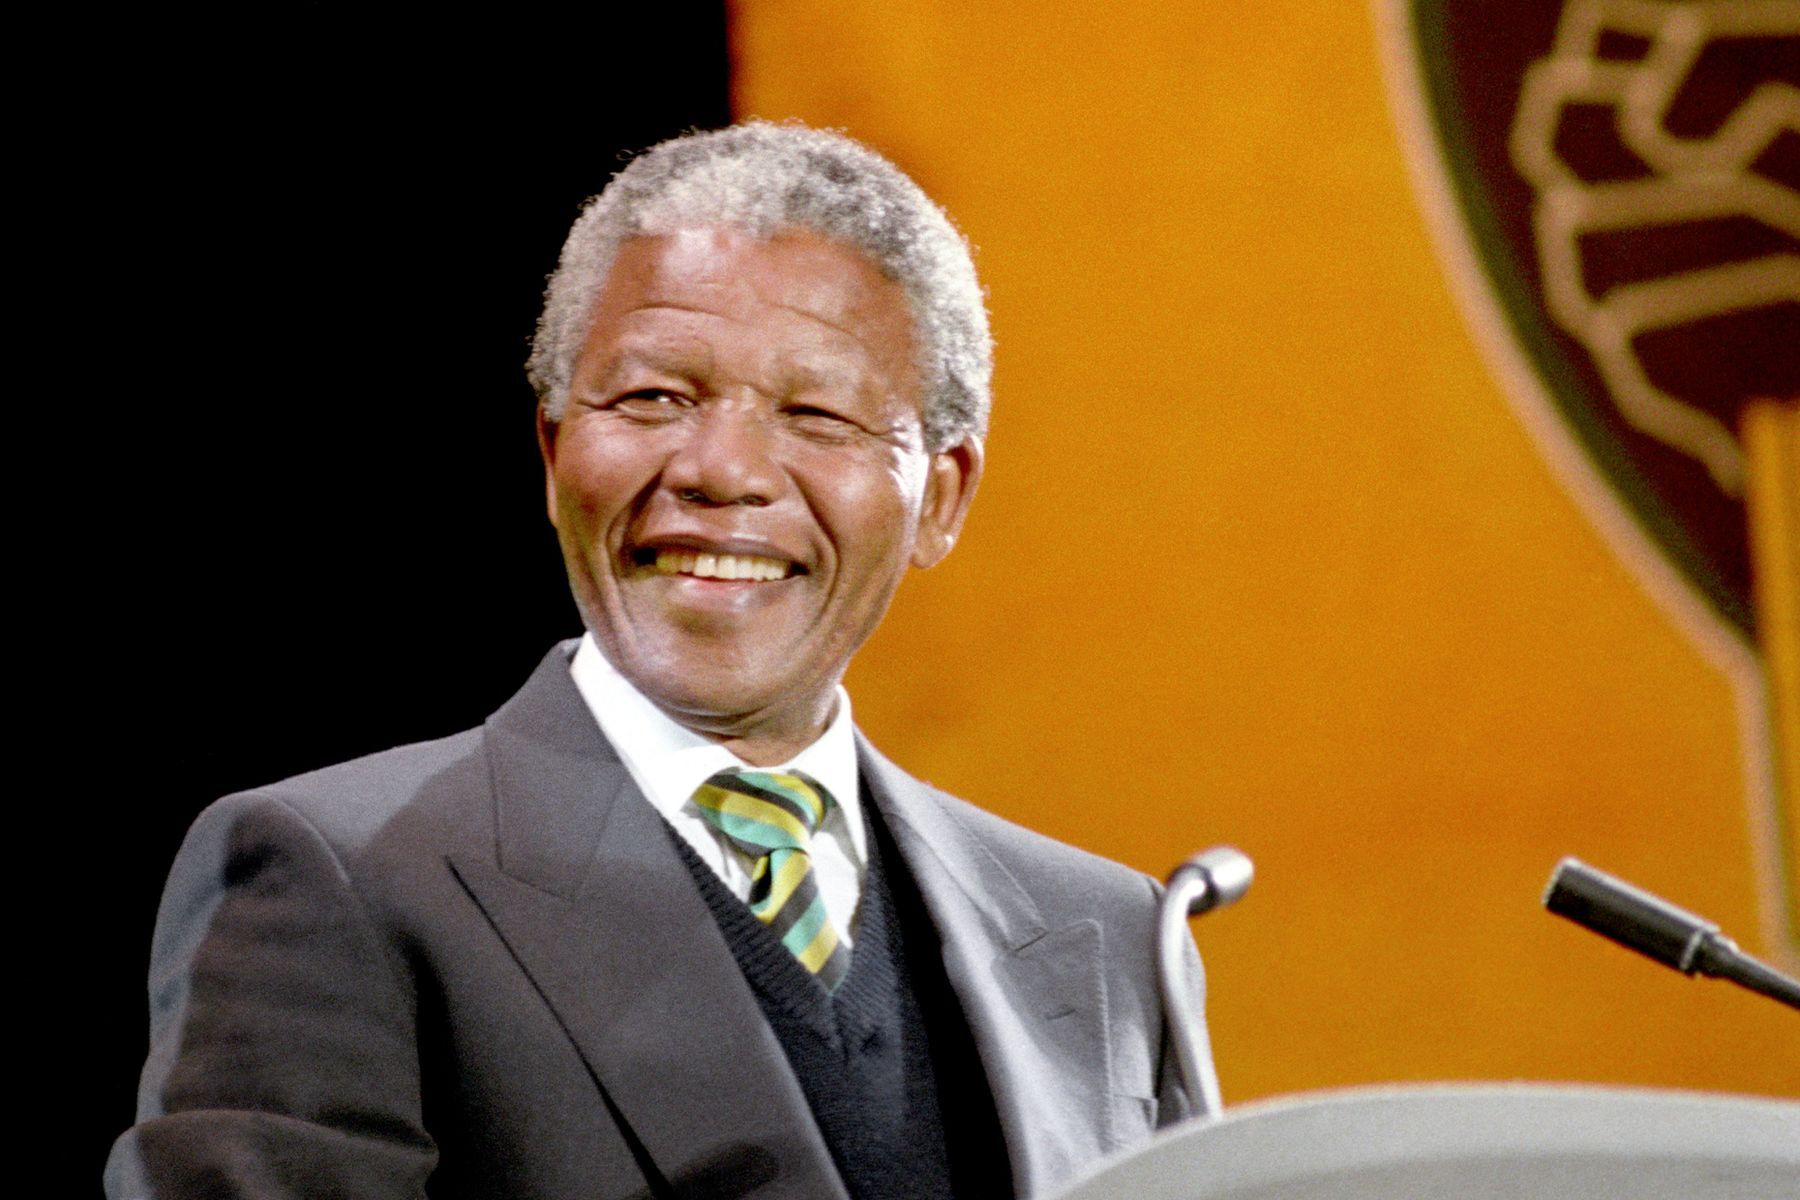 <p><a href="https://www.nelsonmandela.org/content/page/biography" rel="noreferrer noopener">Nelson Rolihlahla Mandela</a> was born into the Thembu royal family on July 18, 1918, in Mvezo (Eastern Cape province). His tribe belonged to the <a href="https://www.britannica.com/topic/Xhosa" rel="noreferrer noopener">Xhosa</a> people. Mandela received a traditional childhood education that would influence his future political vision. Later, he would frequently be called by his <a href="https://www.usatoday.com/story/news/nation-now/2013/12/06/nelson-mandela-madiba-meaning/3889469/" rel="noreferrer noopener">tribal clan name, Madiba</a>.</p>